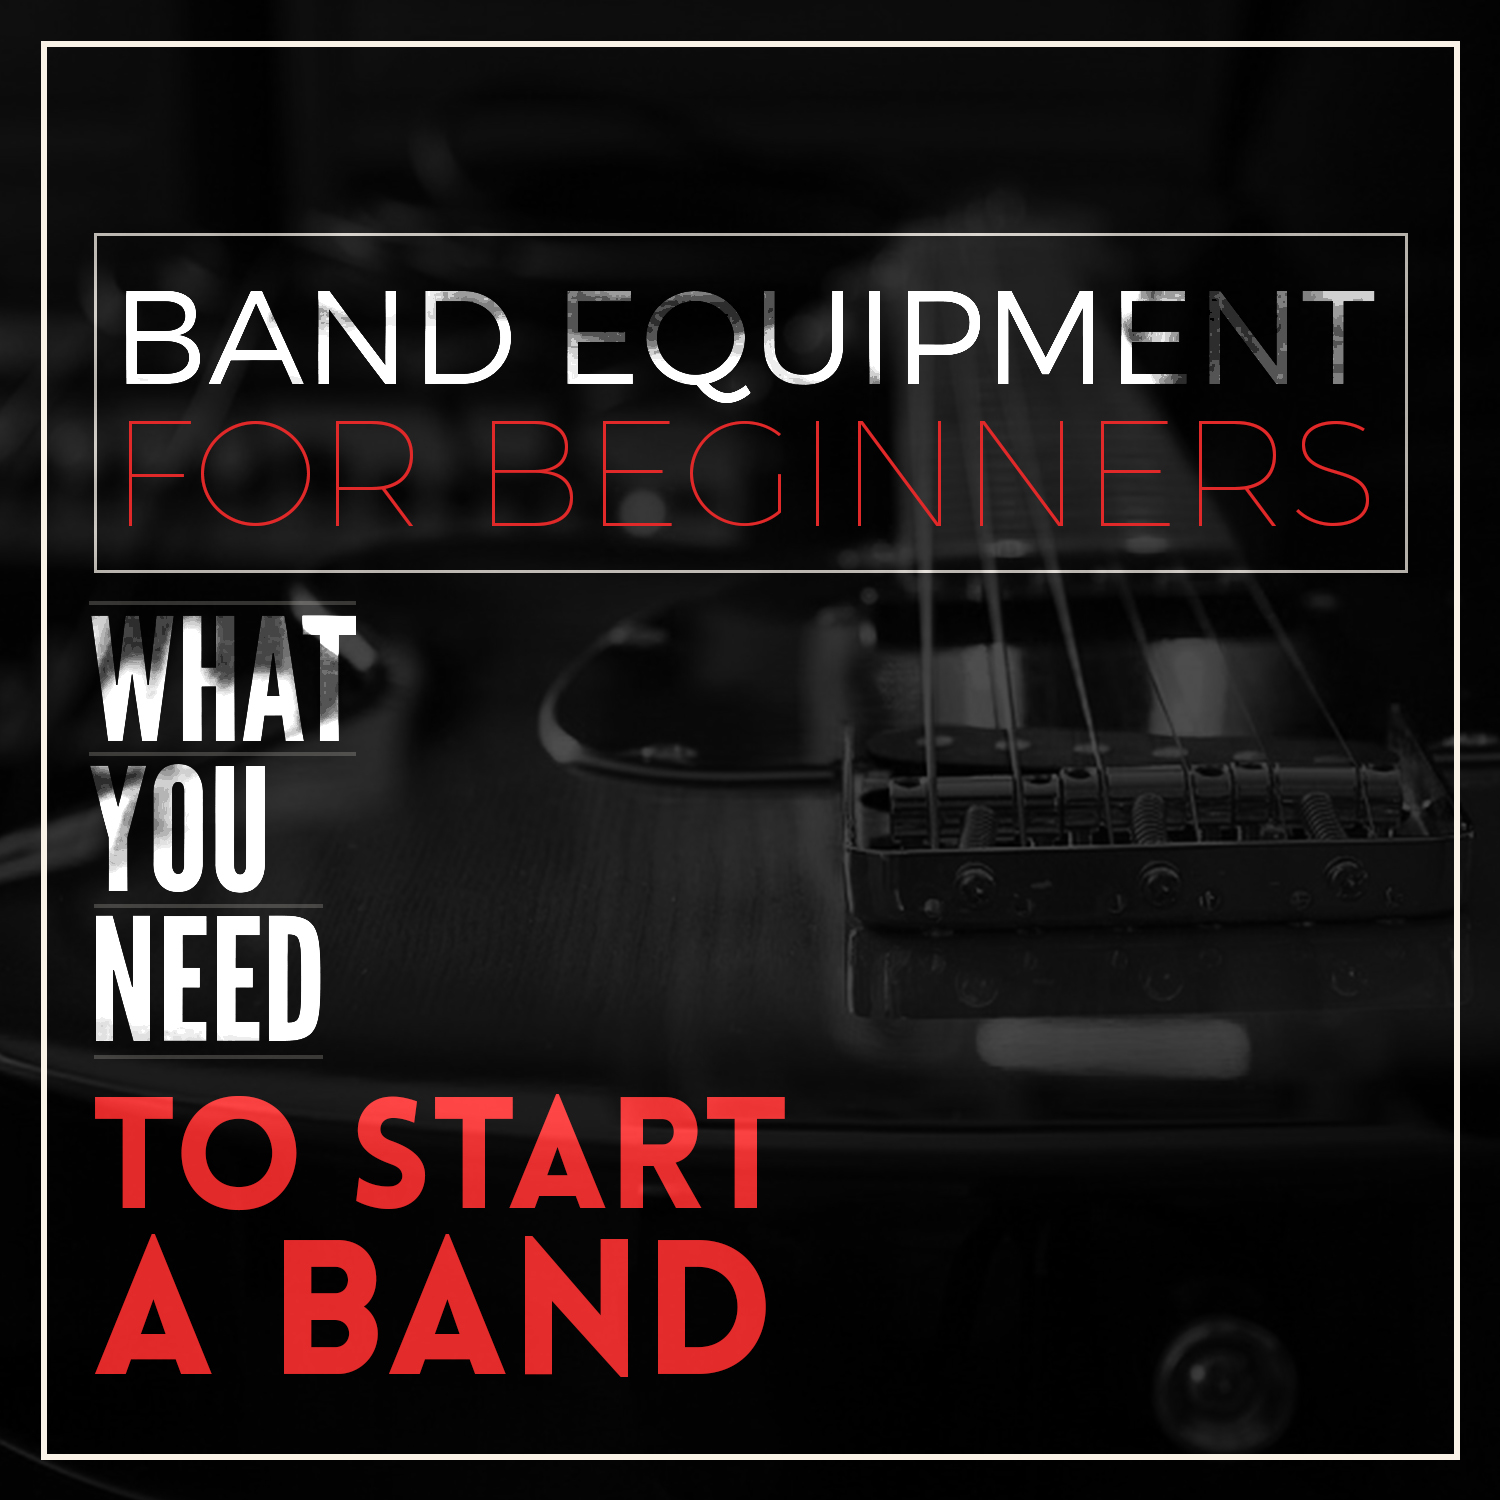 Band Equipments for Beginners What You Need to Start a Band